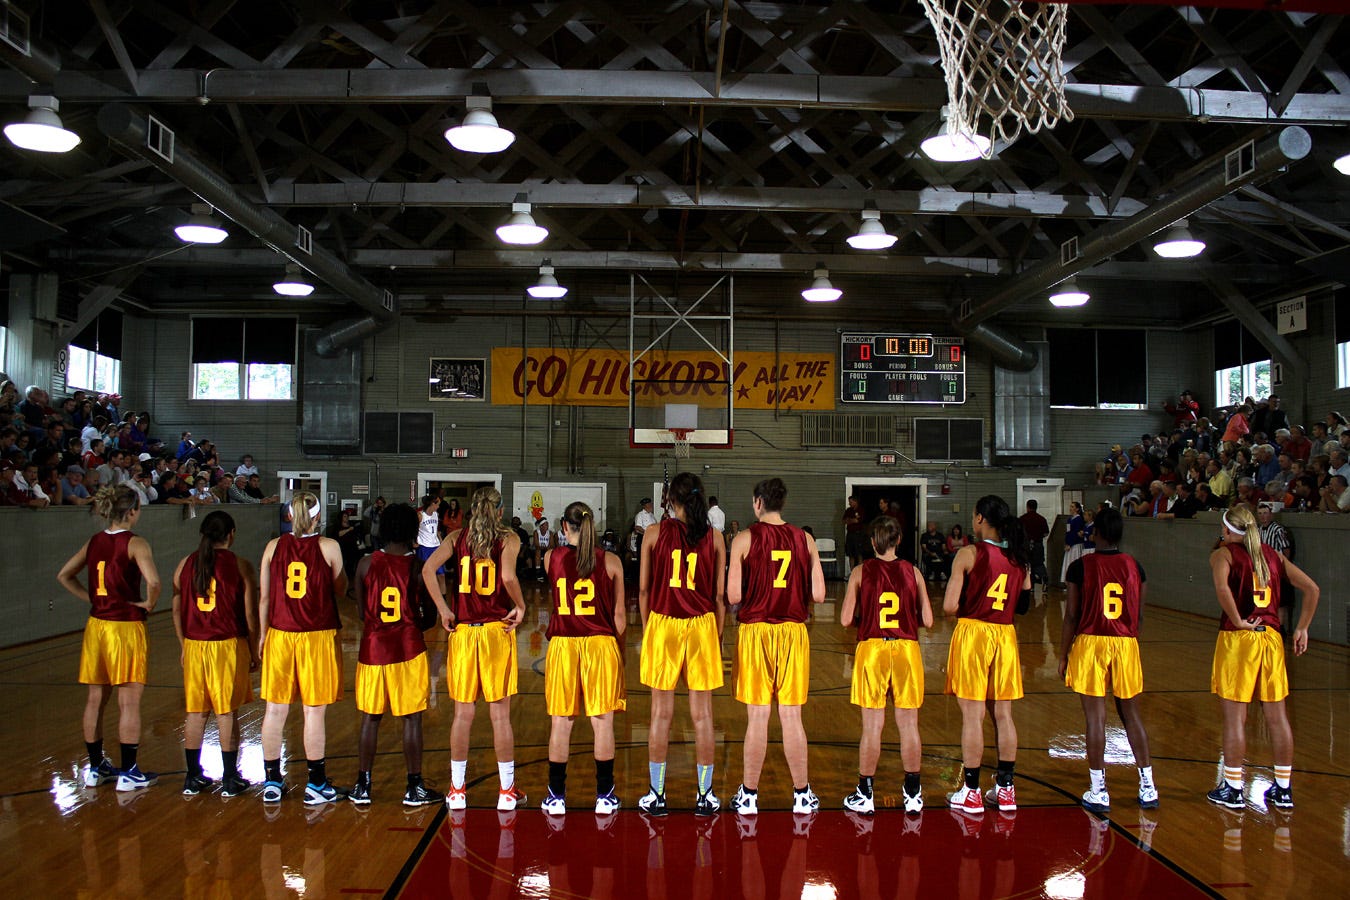 The Lady Hickory Huskers line up for introductions prior to the 2012 game. Some have described their visits to the Hoosier Gym as “stepping into a time machine.” Indeed, this photographer has witnessed grown men cry upon entering what, to them, must be a very special place.